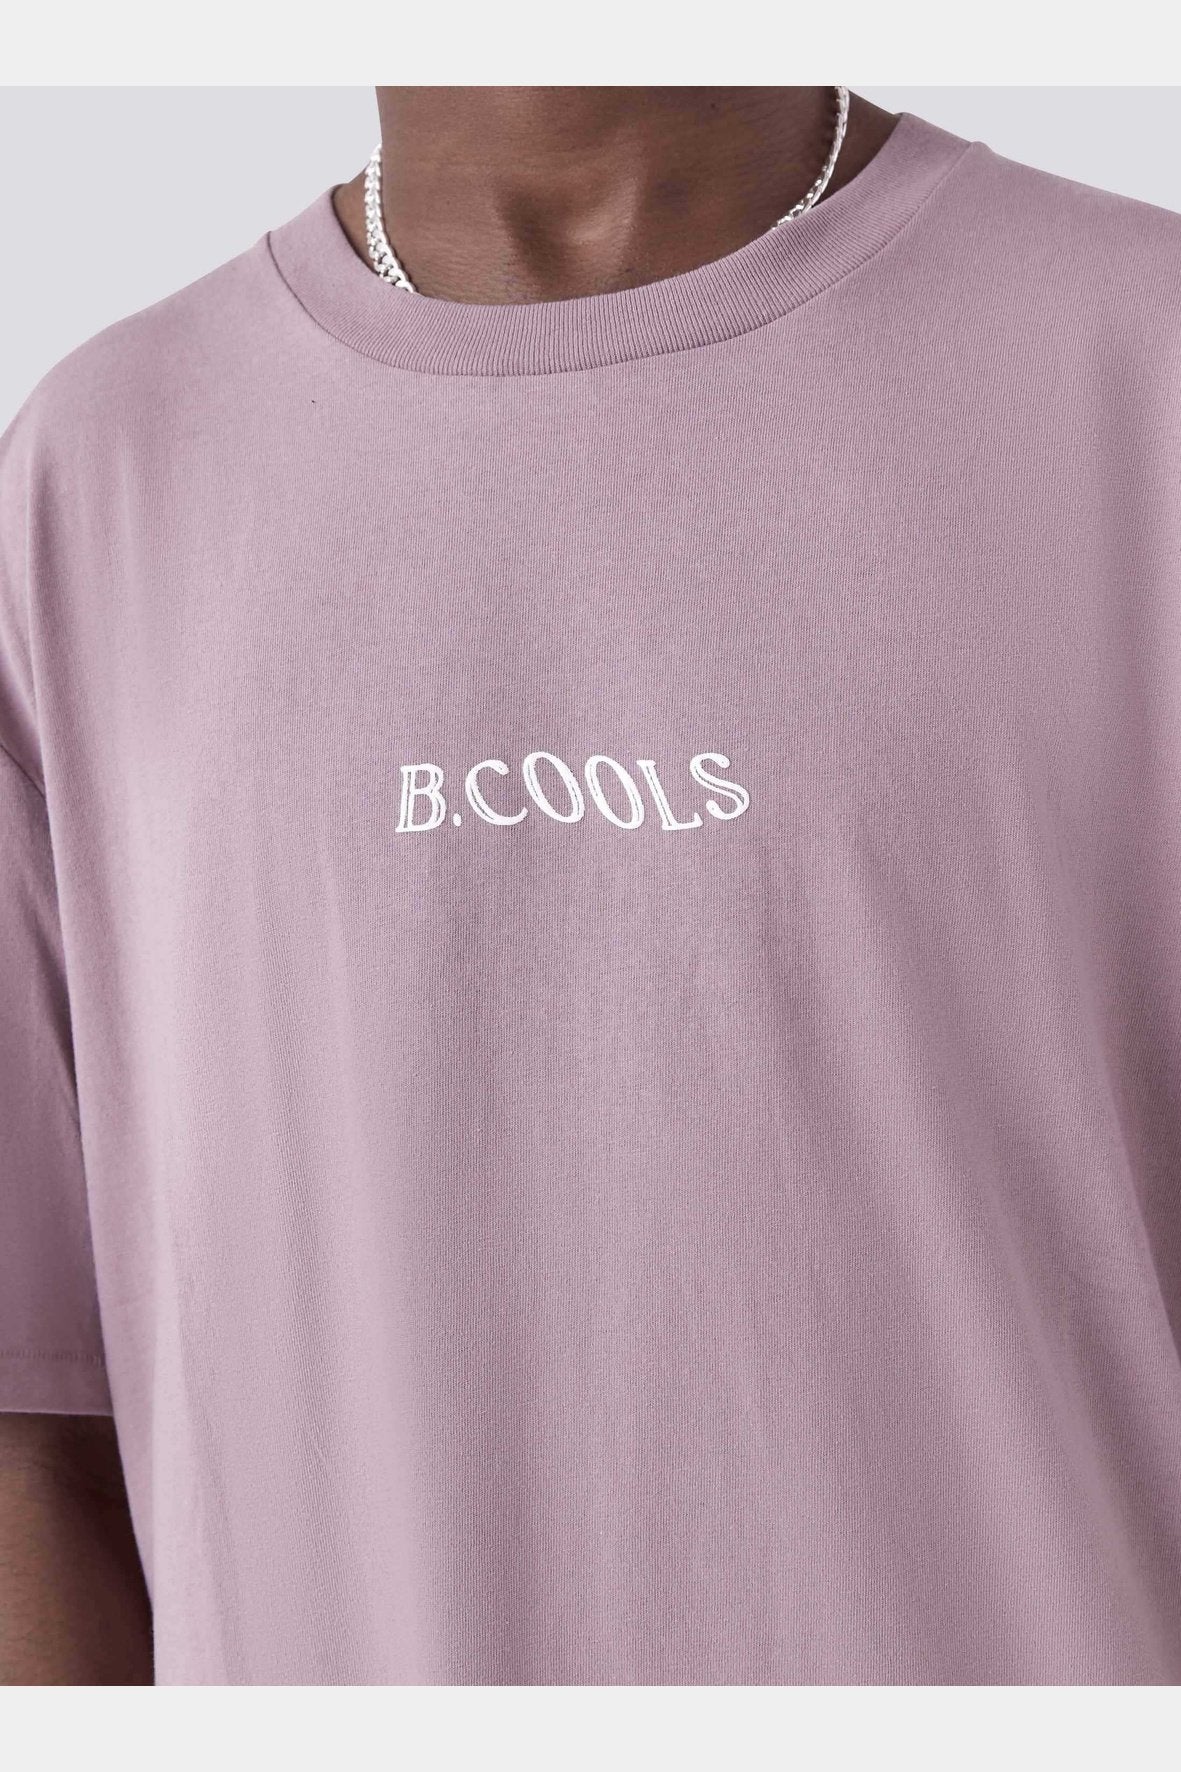 Barney Cools Realised Tee - Dusty Lilac